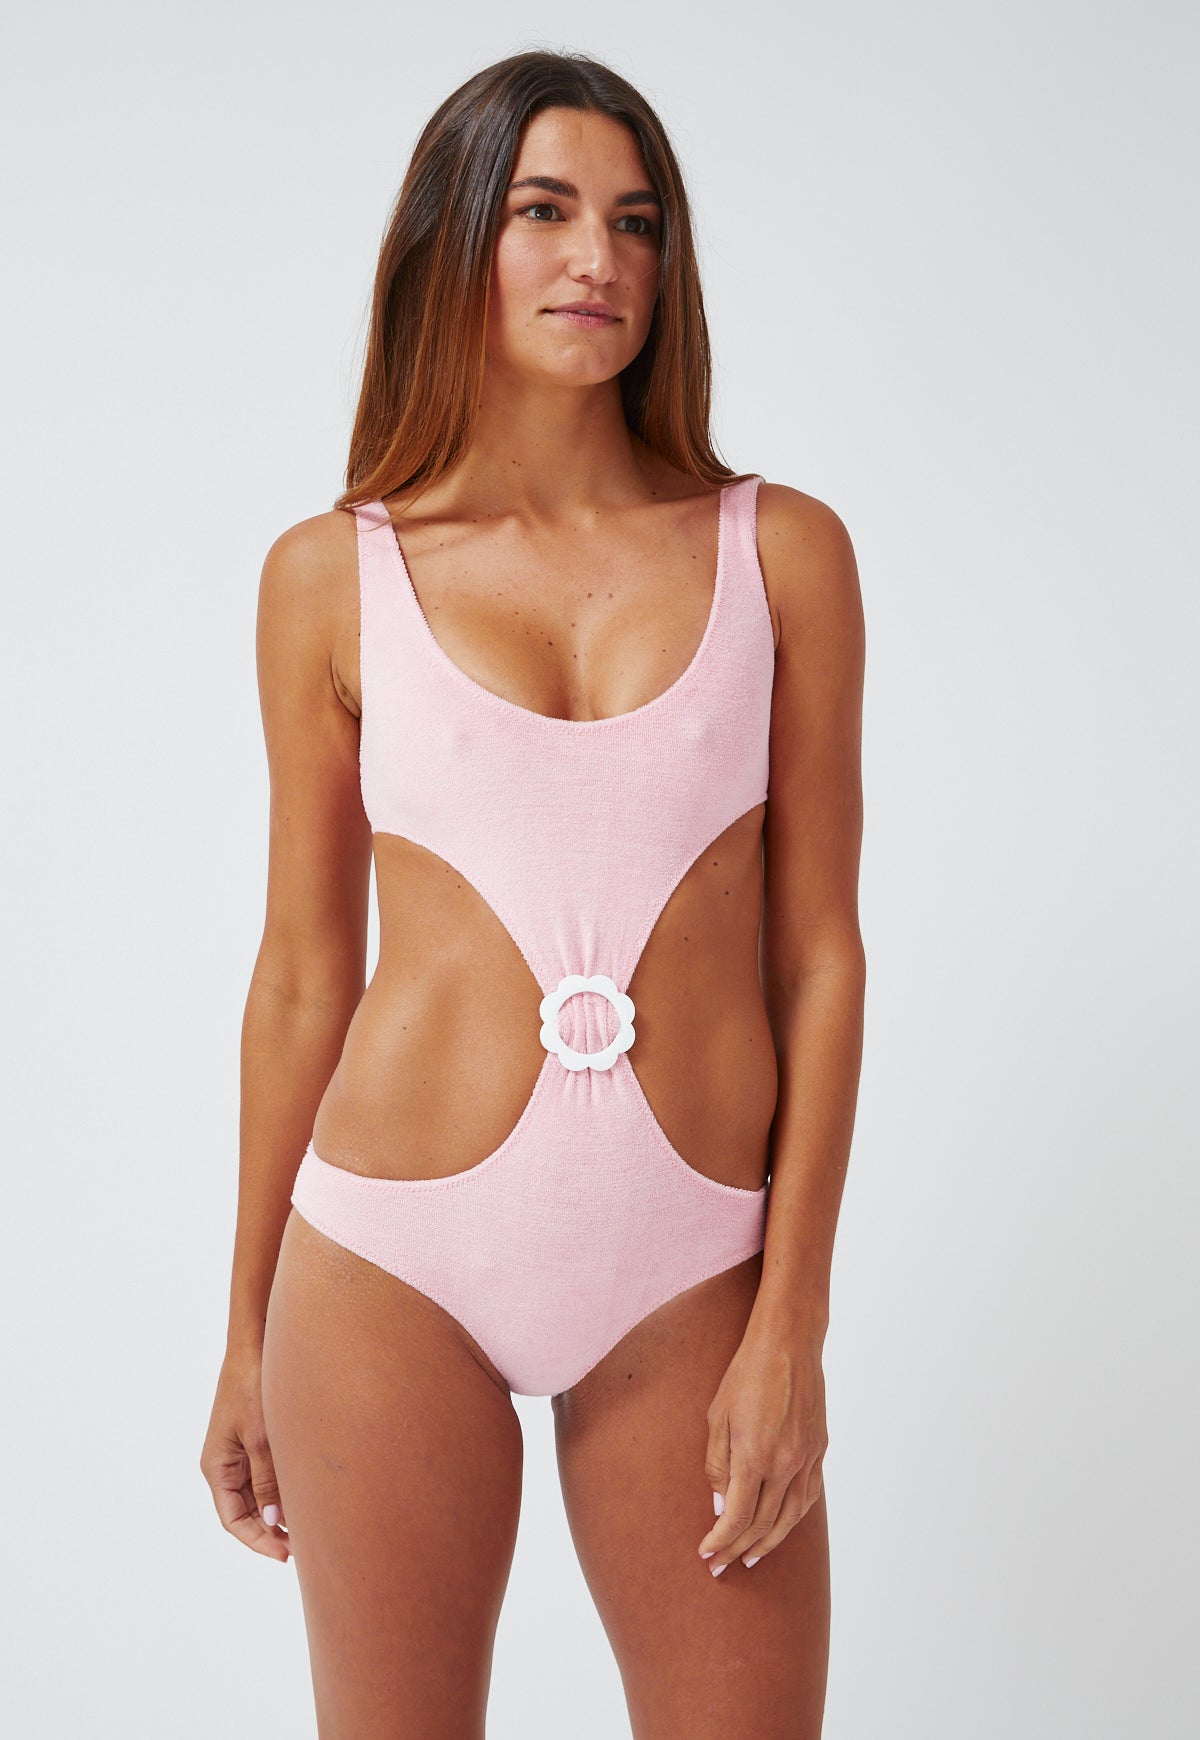 THE SCALLOP CUT-OUT MAILLOT in PINK TERRY CLOTH